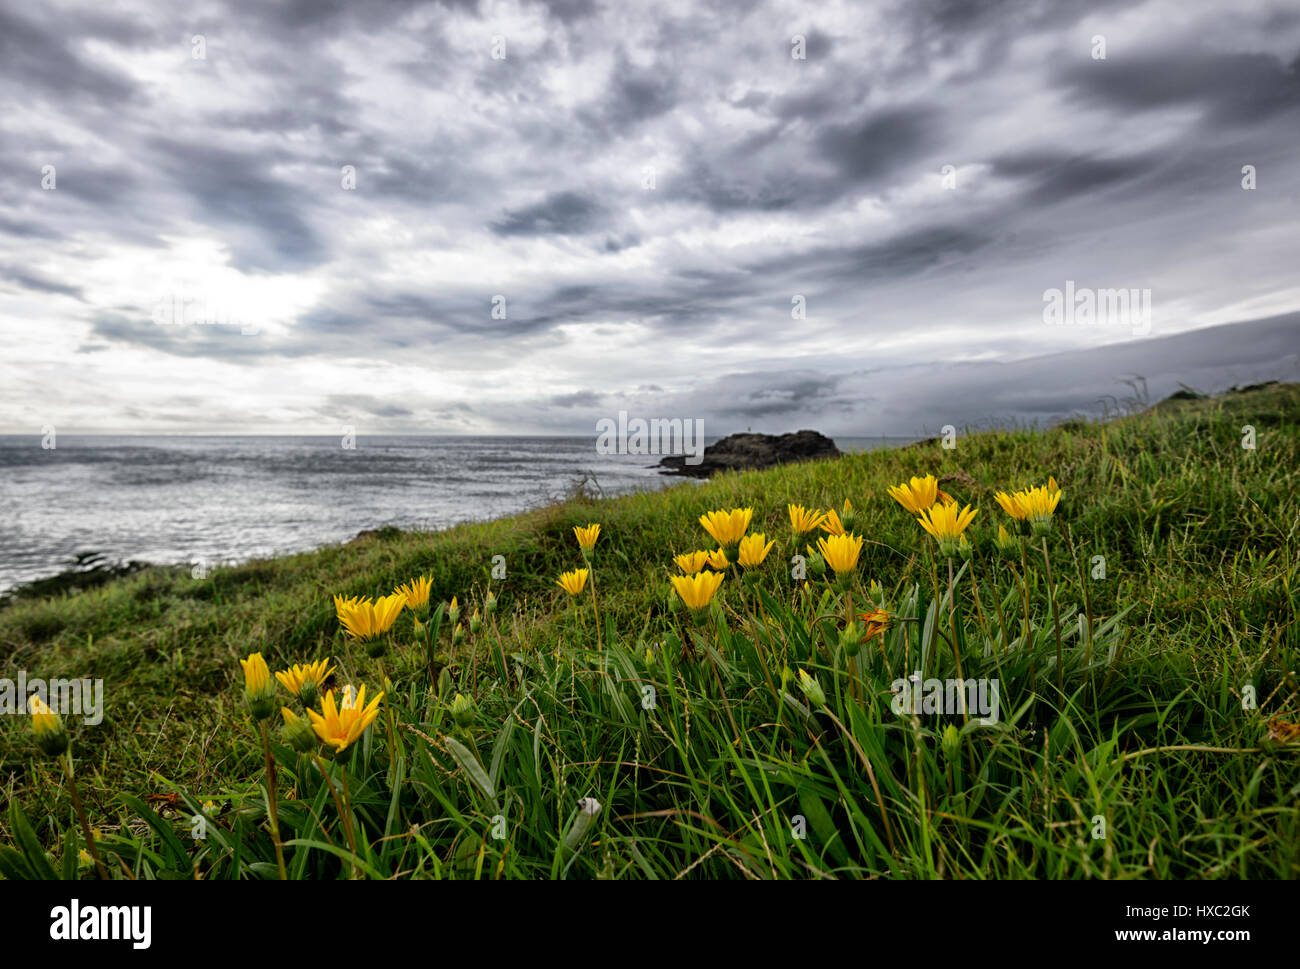 Overcast day with black clouds on the Illawarra Coast, brightened up by yellow wildflowers, Kiama, New South Wales, NSW, Australia Stock Photo